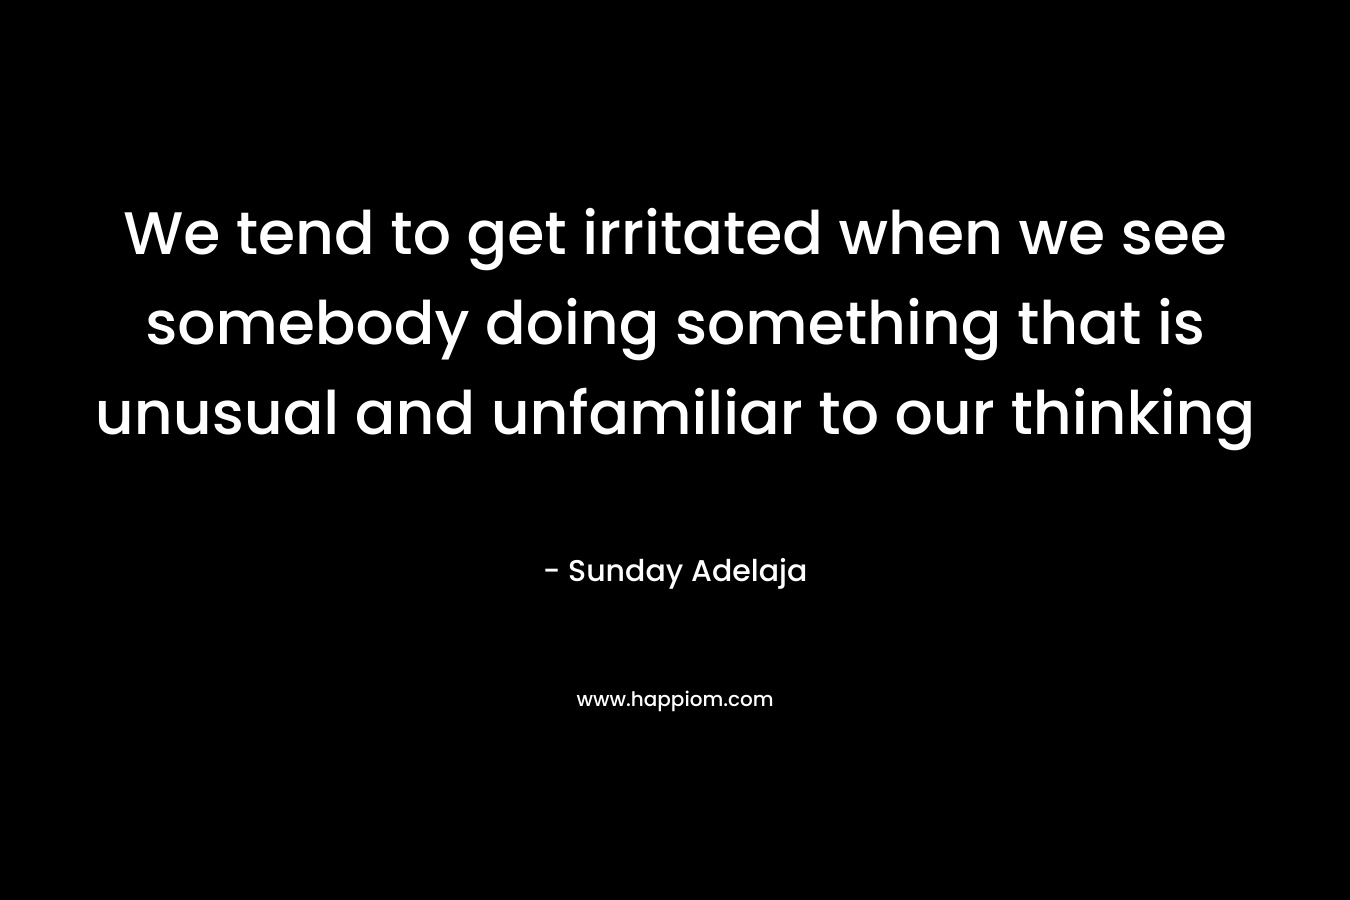 We tend to get irritated when we see somebody doing something that is unusual and unfamiliar to our thinking – Sunday Adelaja